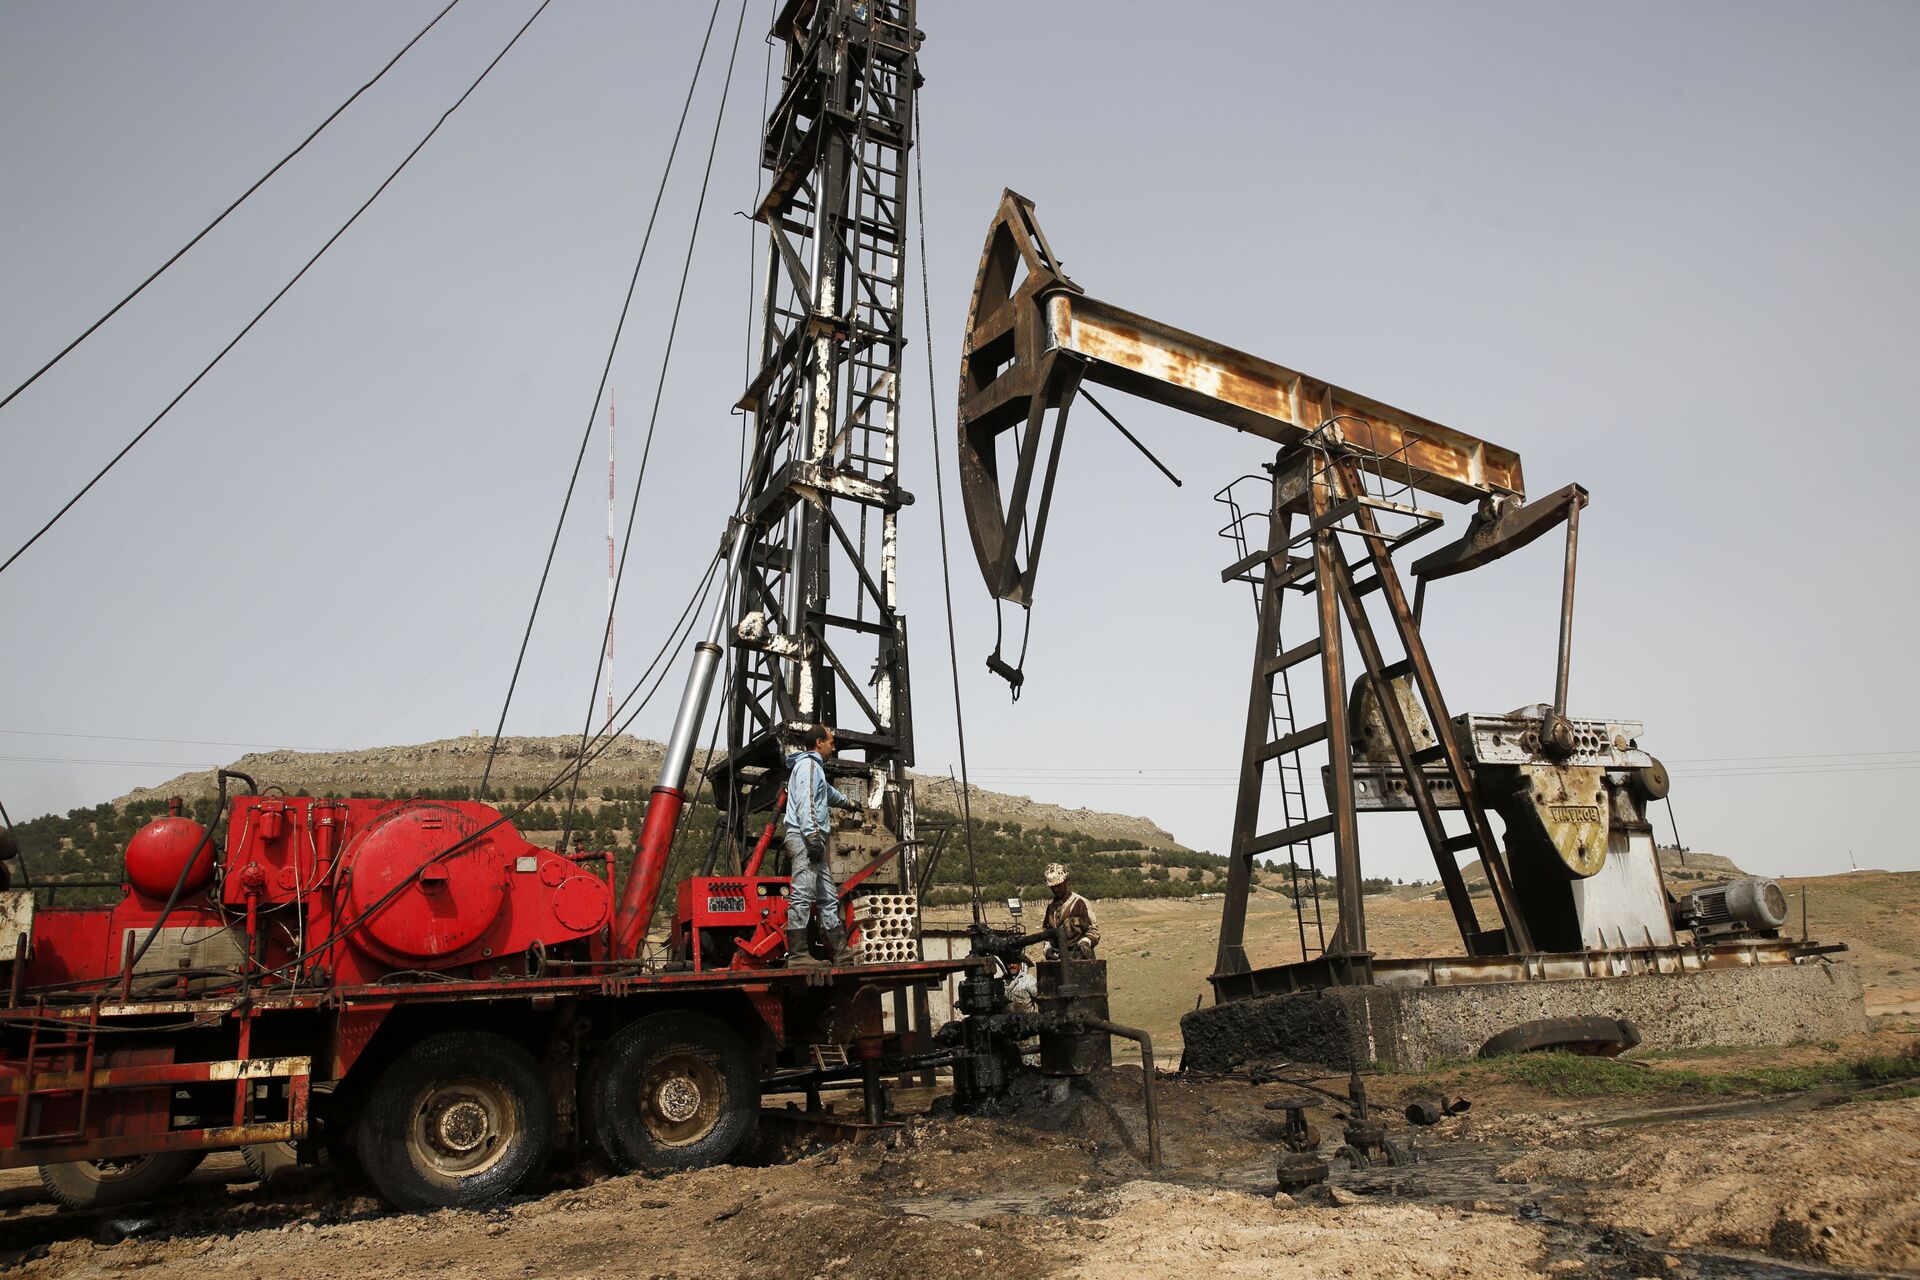 This March 27, 2018 file photo shows Syrian workers fixing pipes of an oil well at an oil field controlled by a U.S-backed Kurdish group, in Rmeilan, Hassakeh province, Syria. - Sputnik International, 1920, 16.04.2022